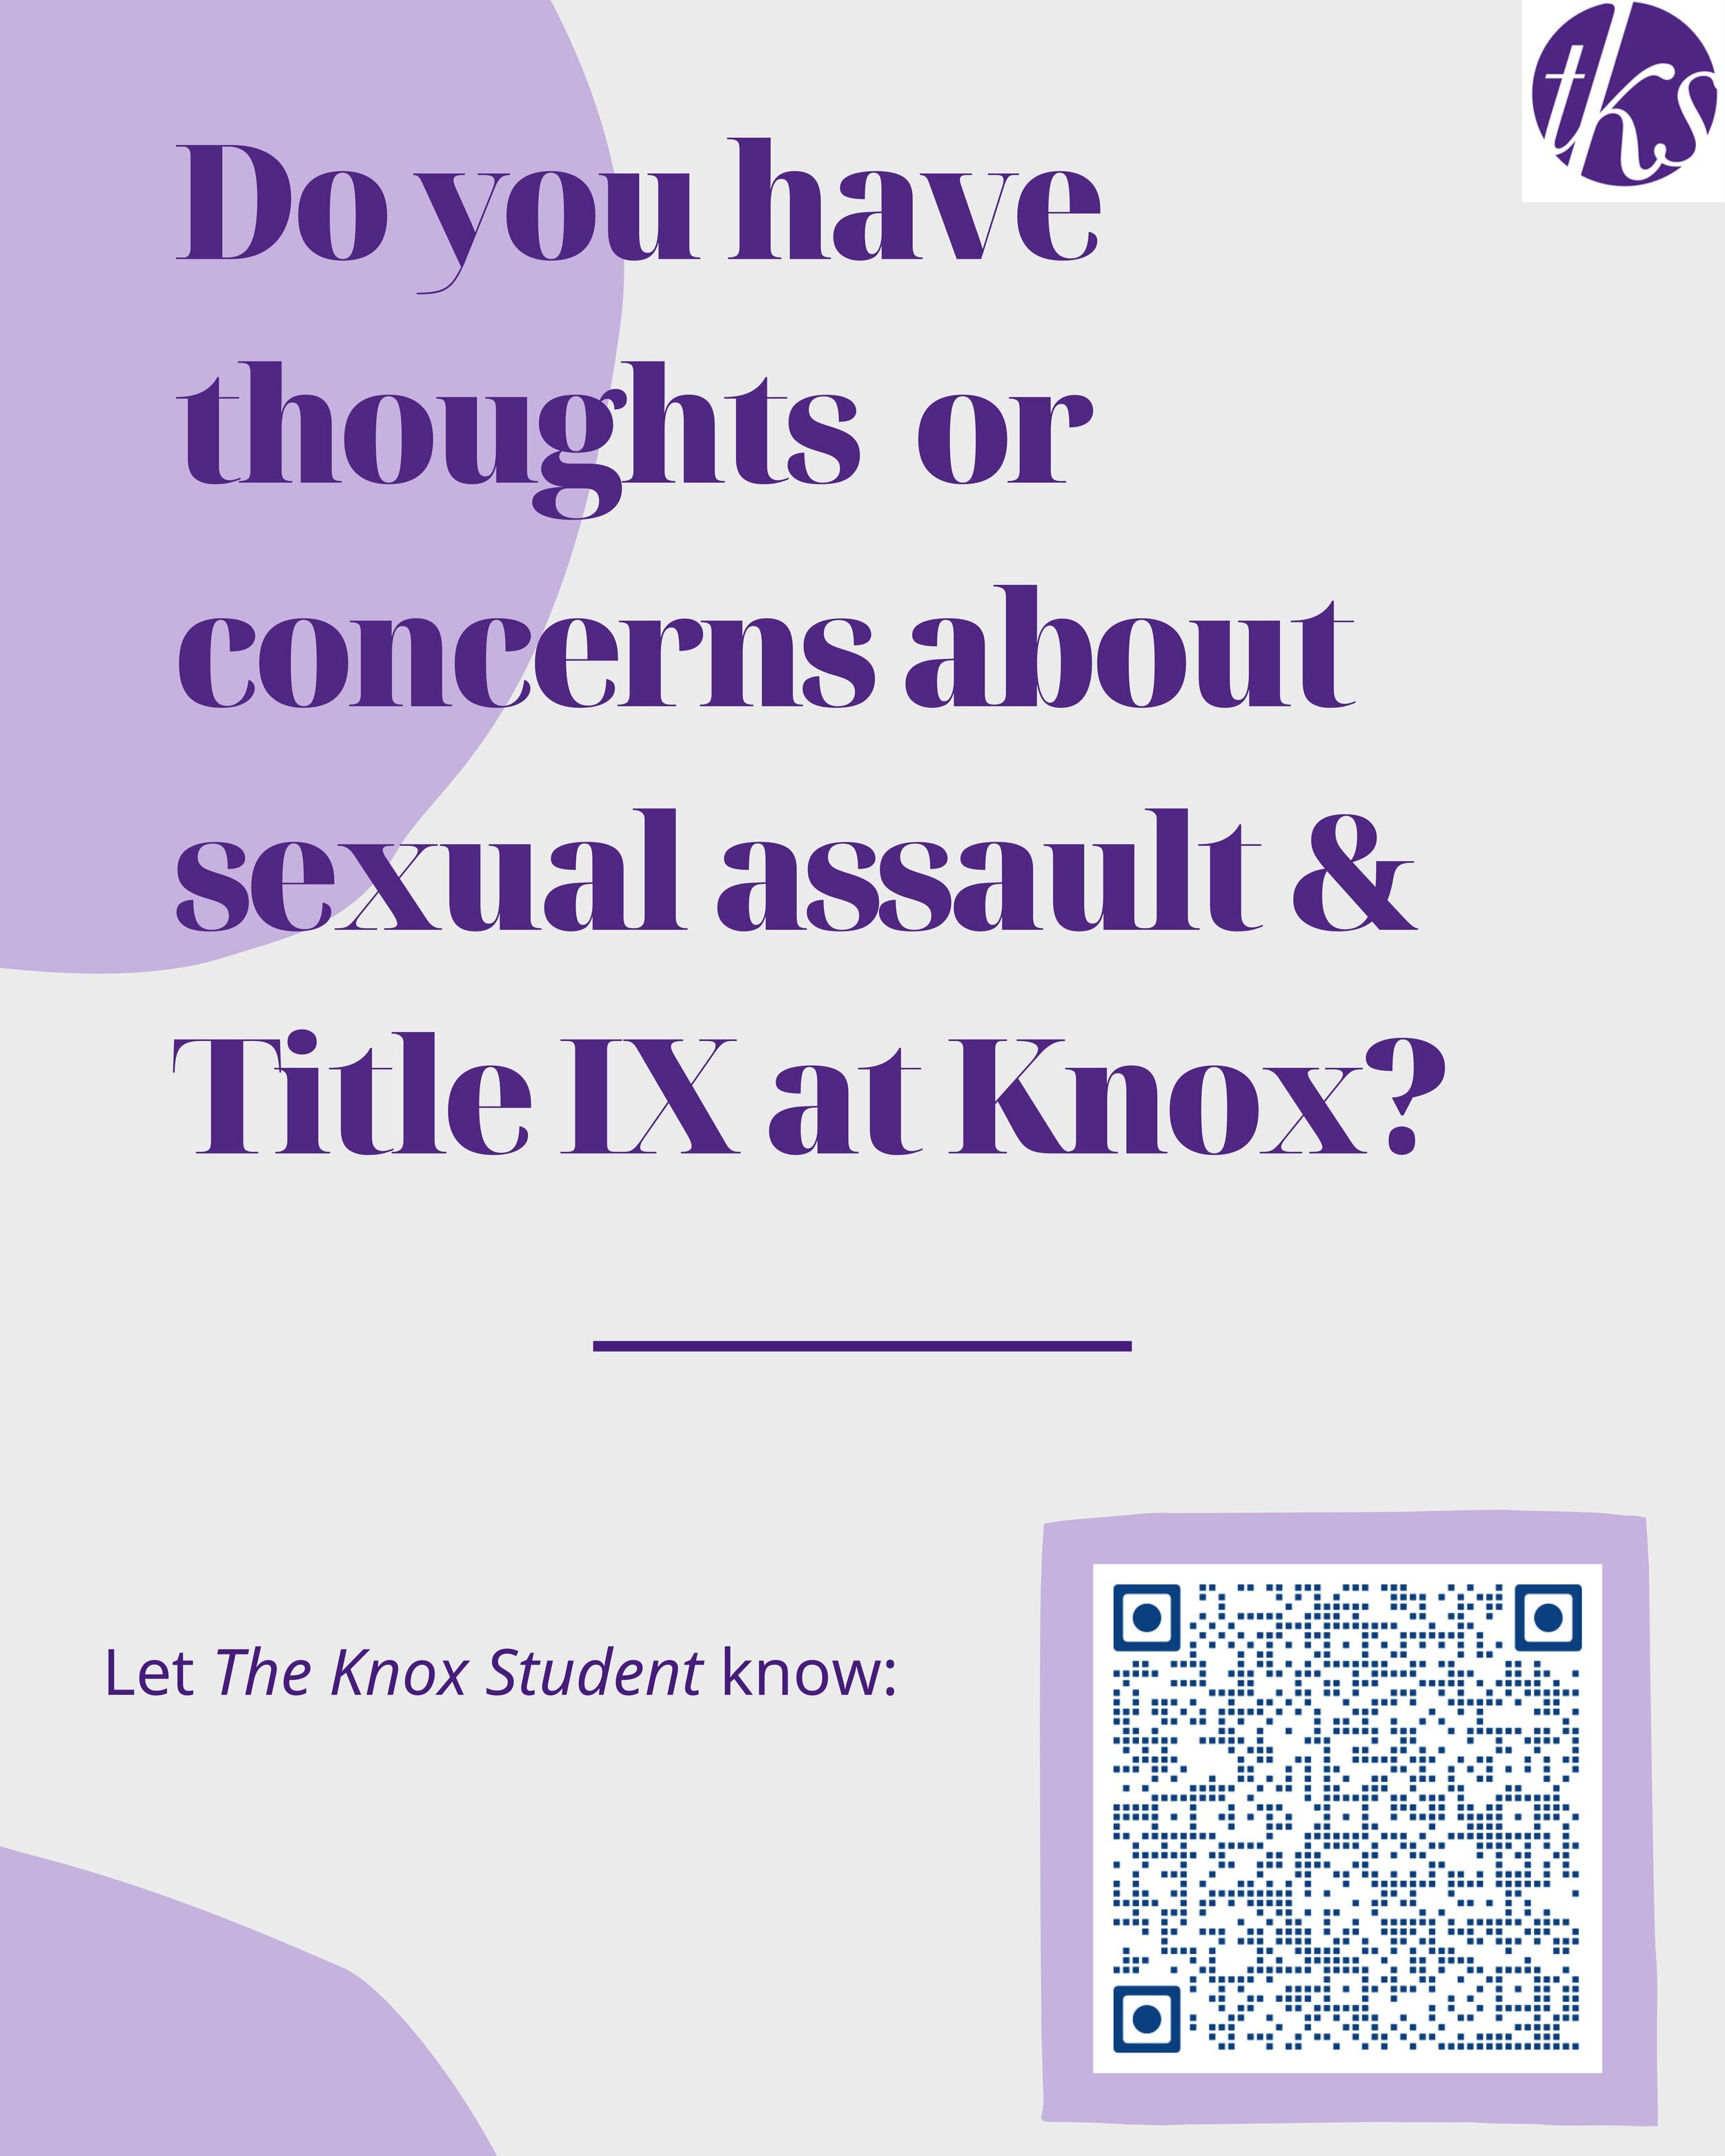 TKS is investigating issues surrounding sexual assault and Title IX at Knox.If you have thoughts or concerns about Title IX and its related issues, including how we will report it, let us know through this Google form. Please share this form with ot…